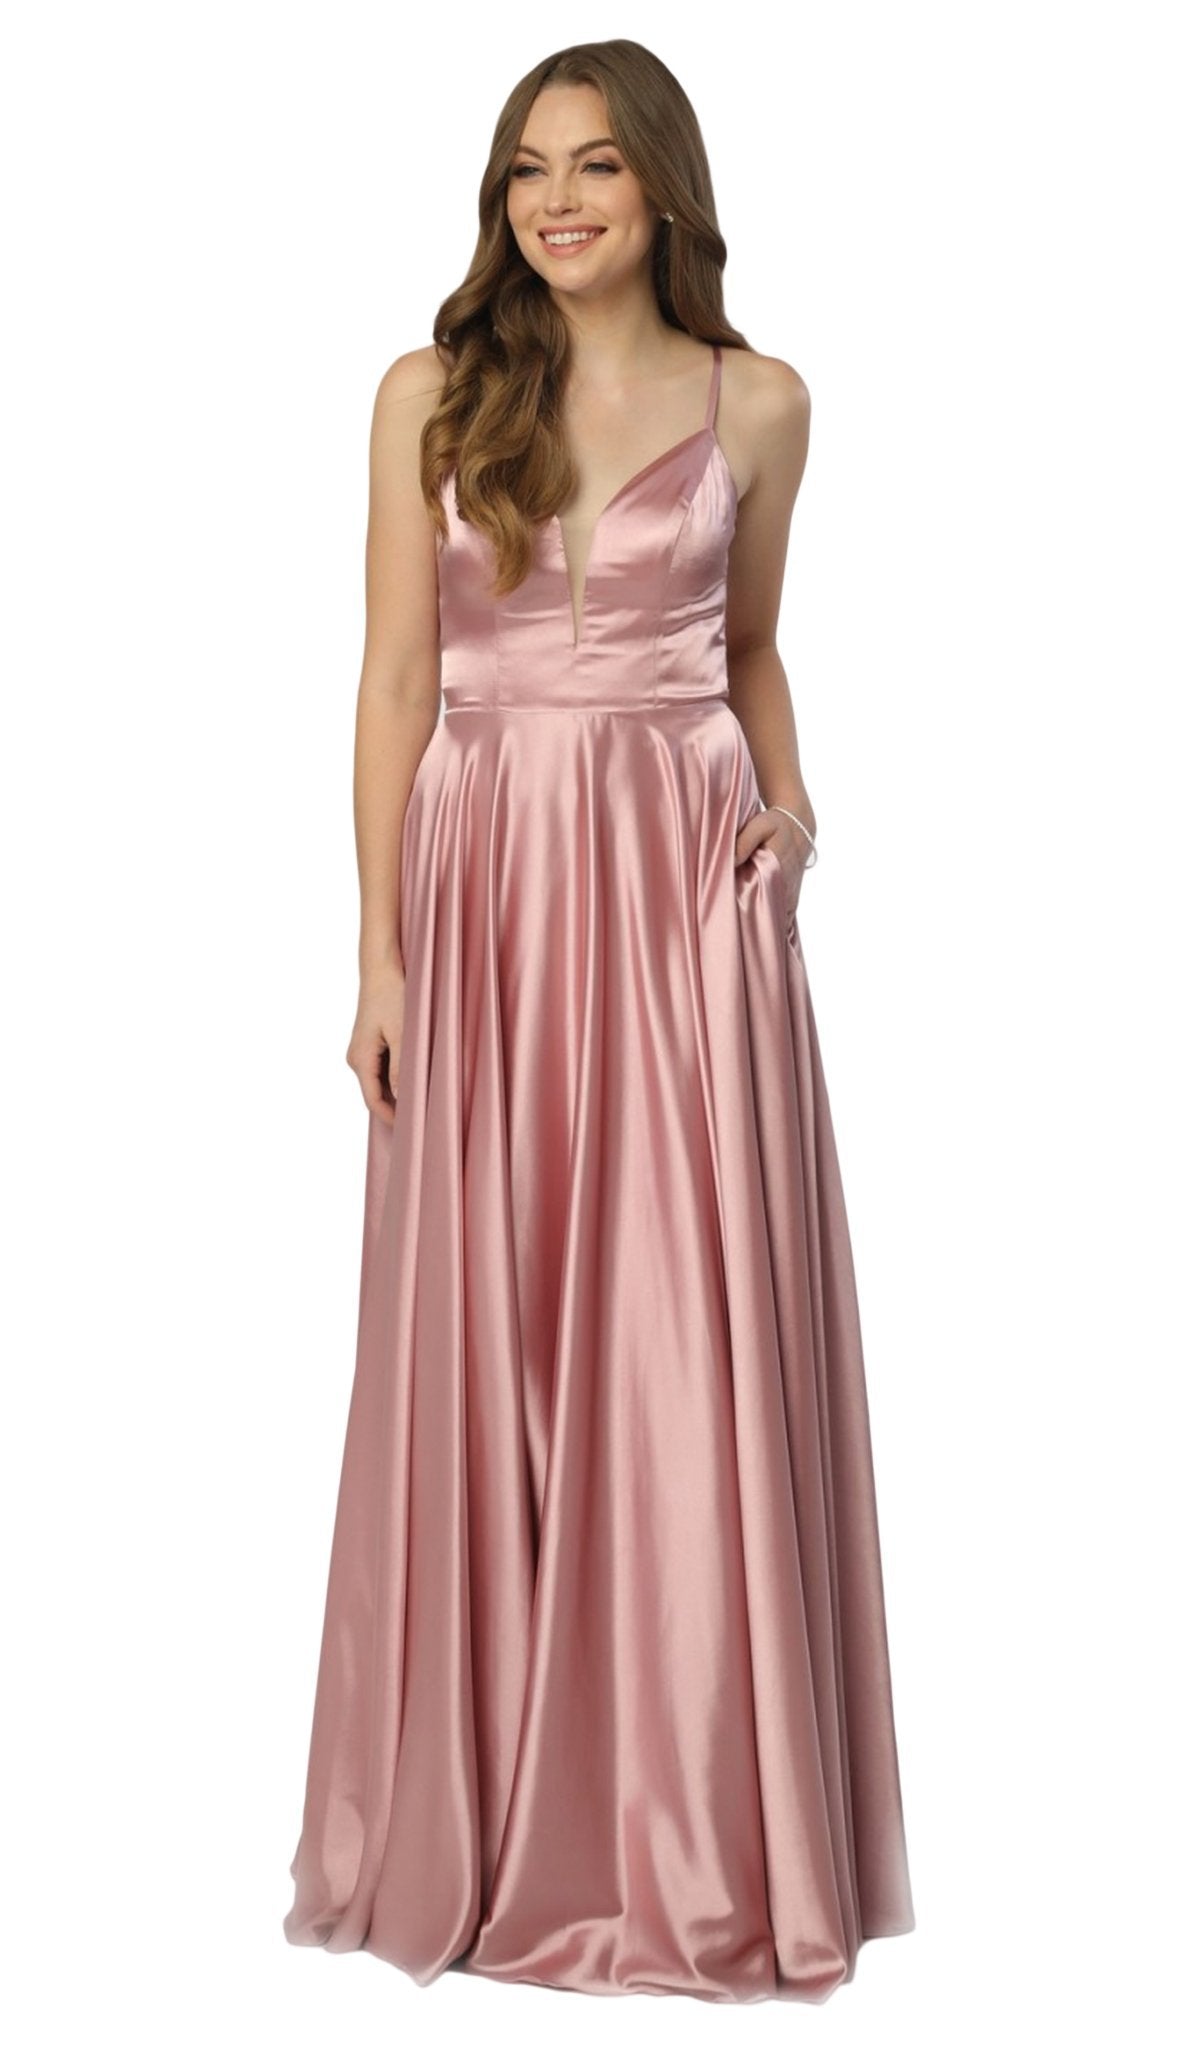 Nox Anabel - A180 Deep V-neck A-line Dress With Strappy Back Special Occasion Dress XS / Rose